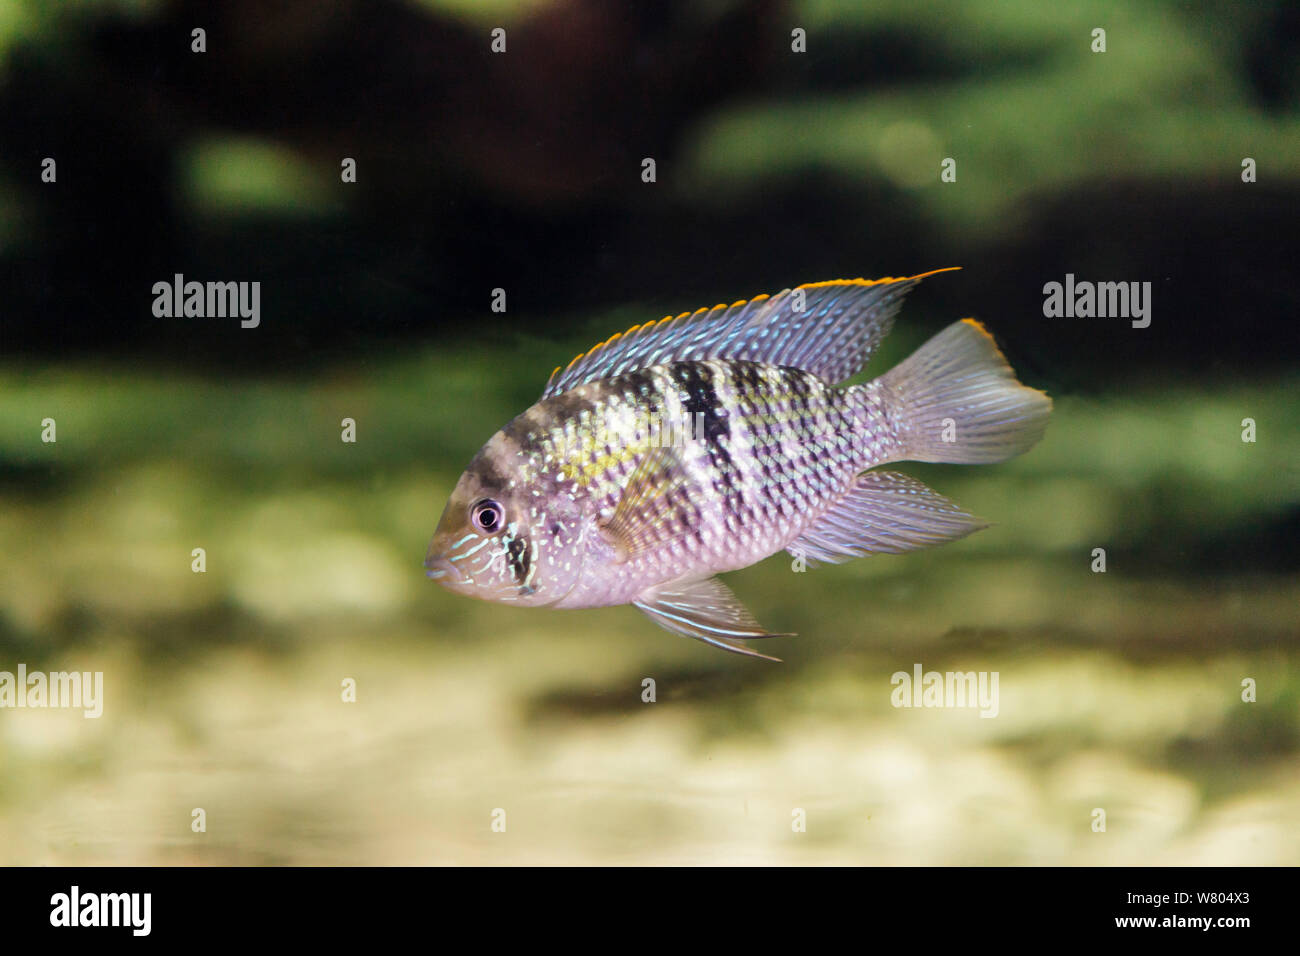 Blue acara (Andinoacara pulcher) captive, occurs in South and Central America. Stock Photo